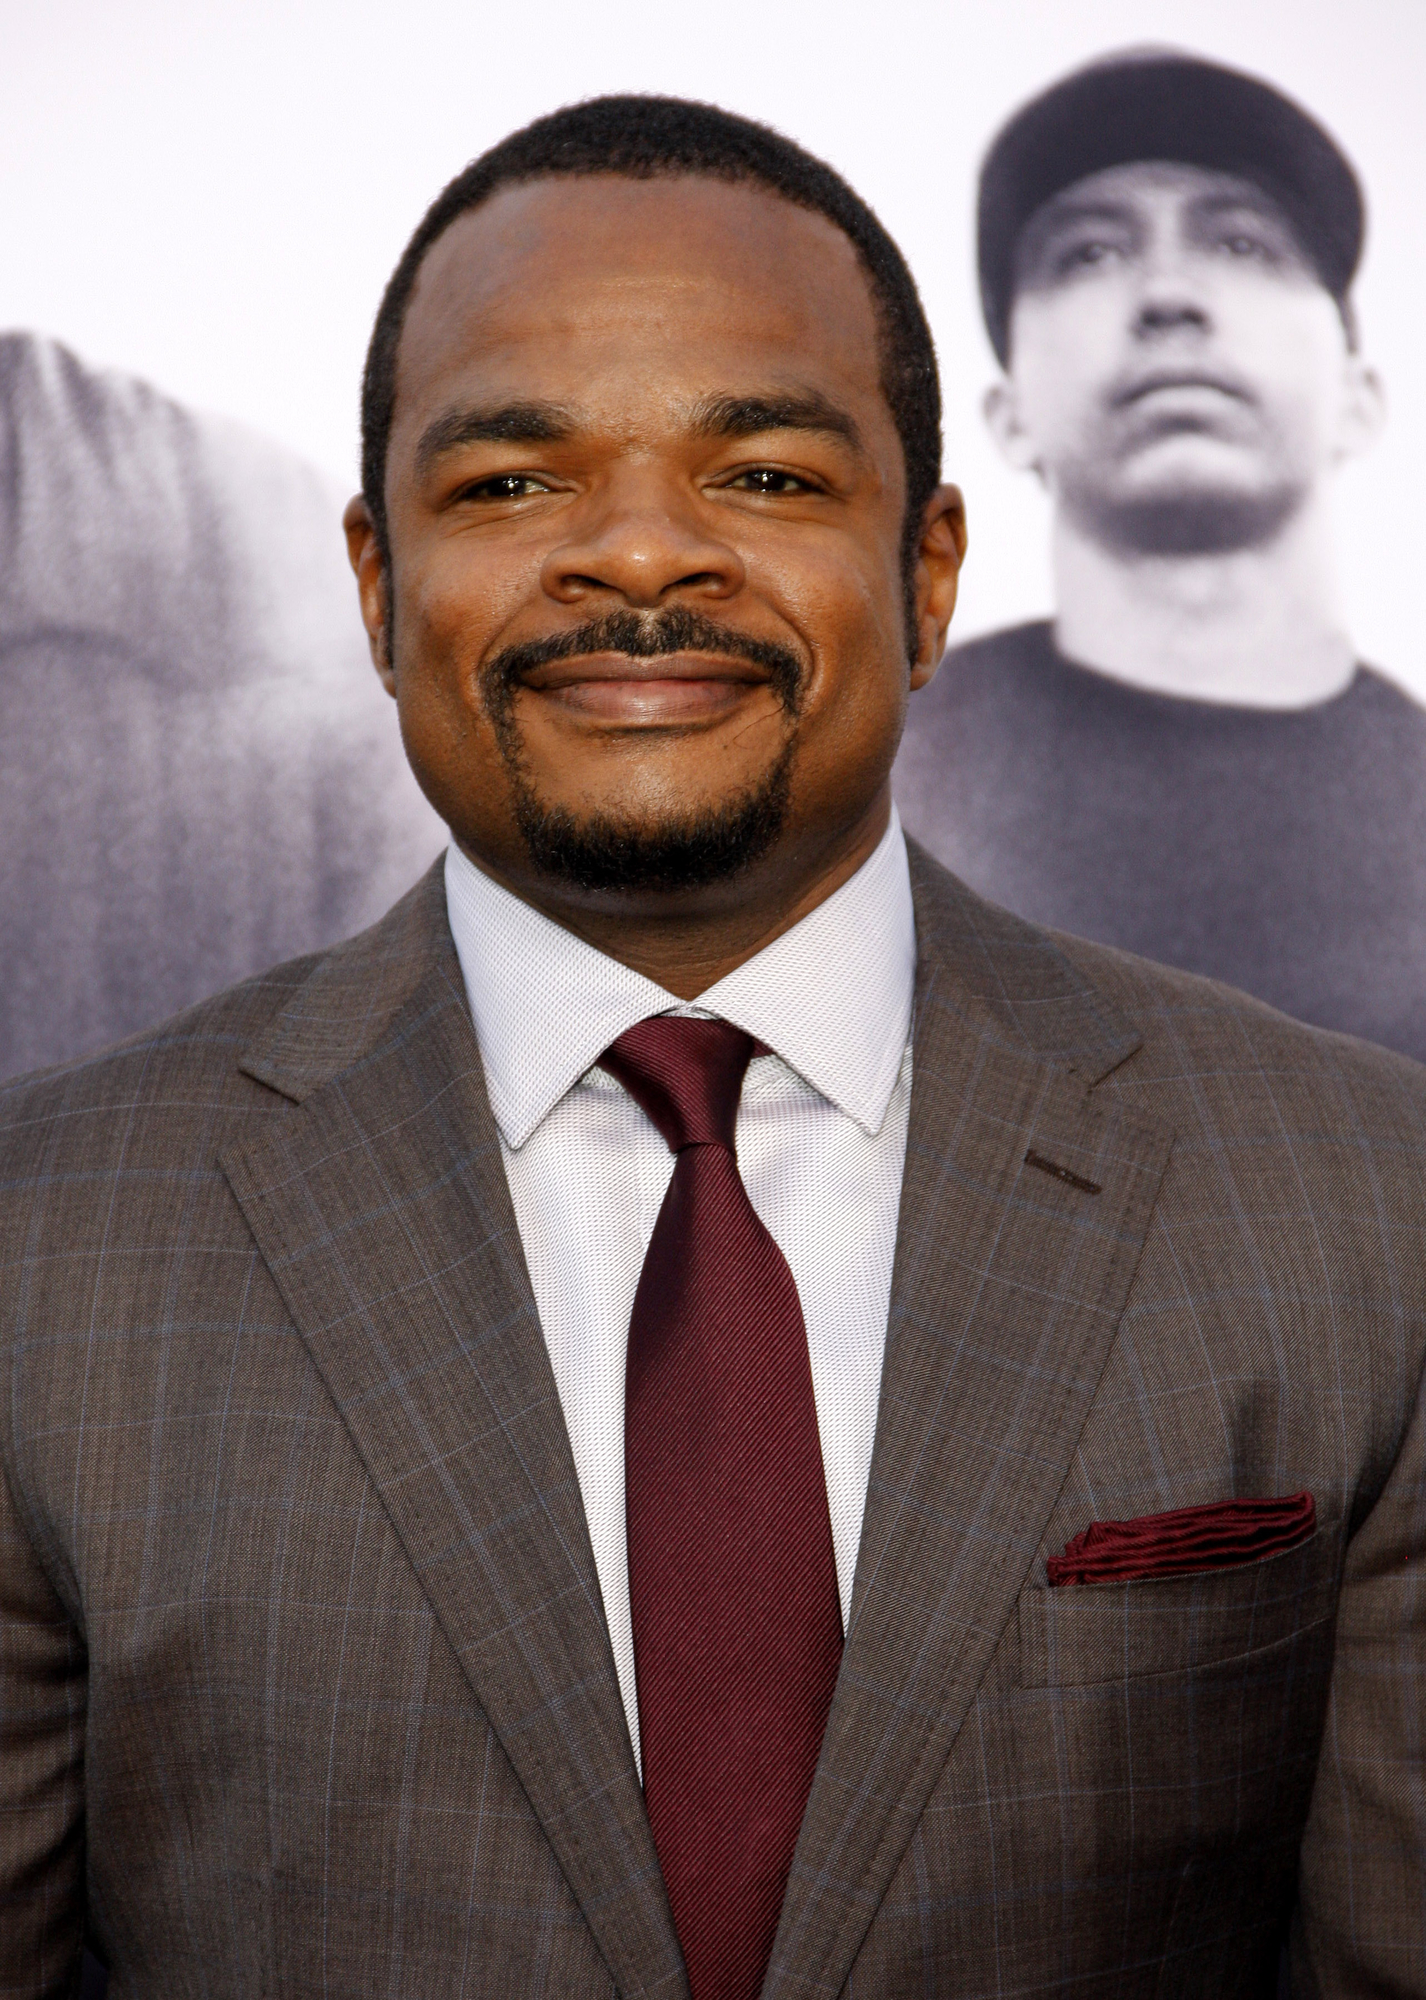 F. Gary Gray at the Los Angeles premiere of 'Straight Outta Compton' held at the Microsoft Theater in Los Angeles, USA on August 10, 2015. Photo: u92slc.com